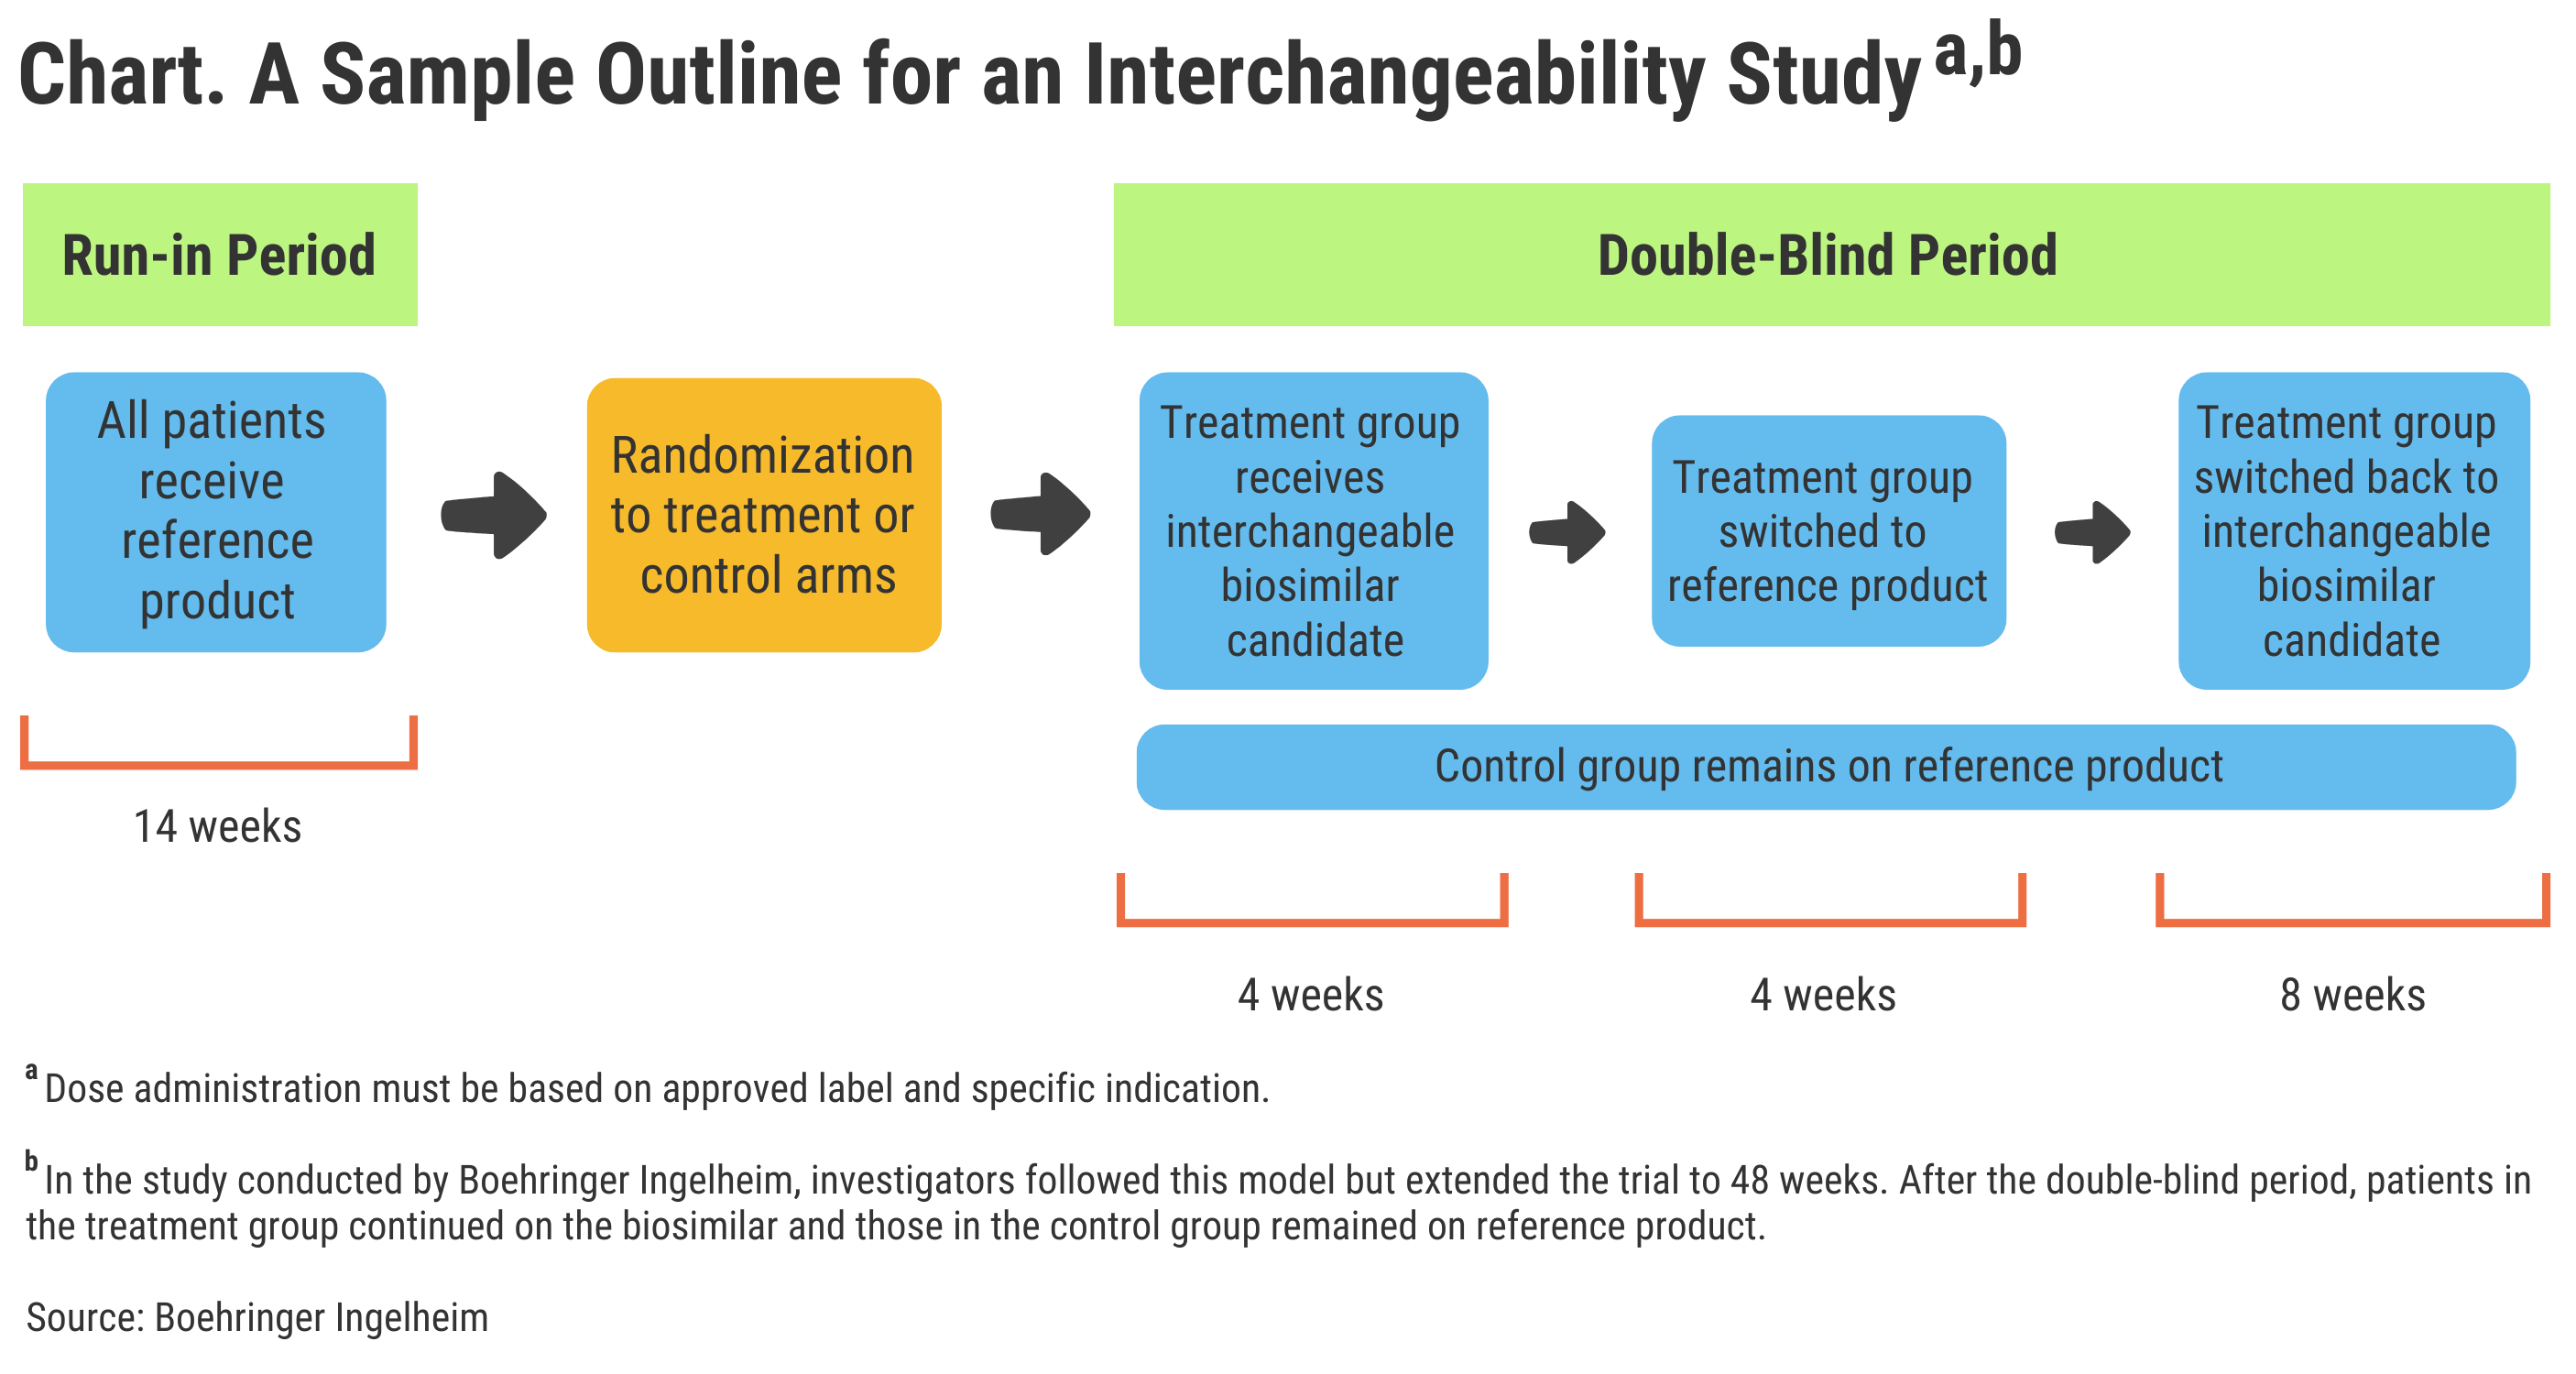 Chart. A Sample Outline for an Interchangeability Study